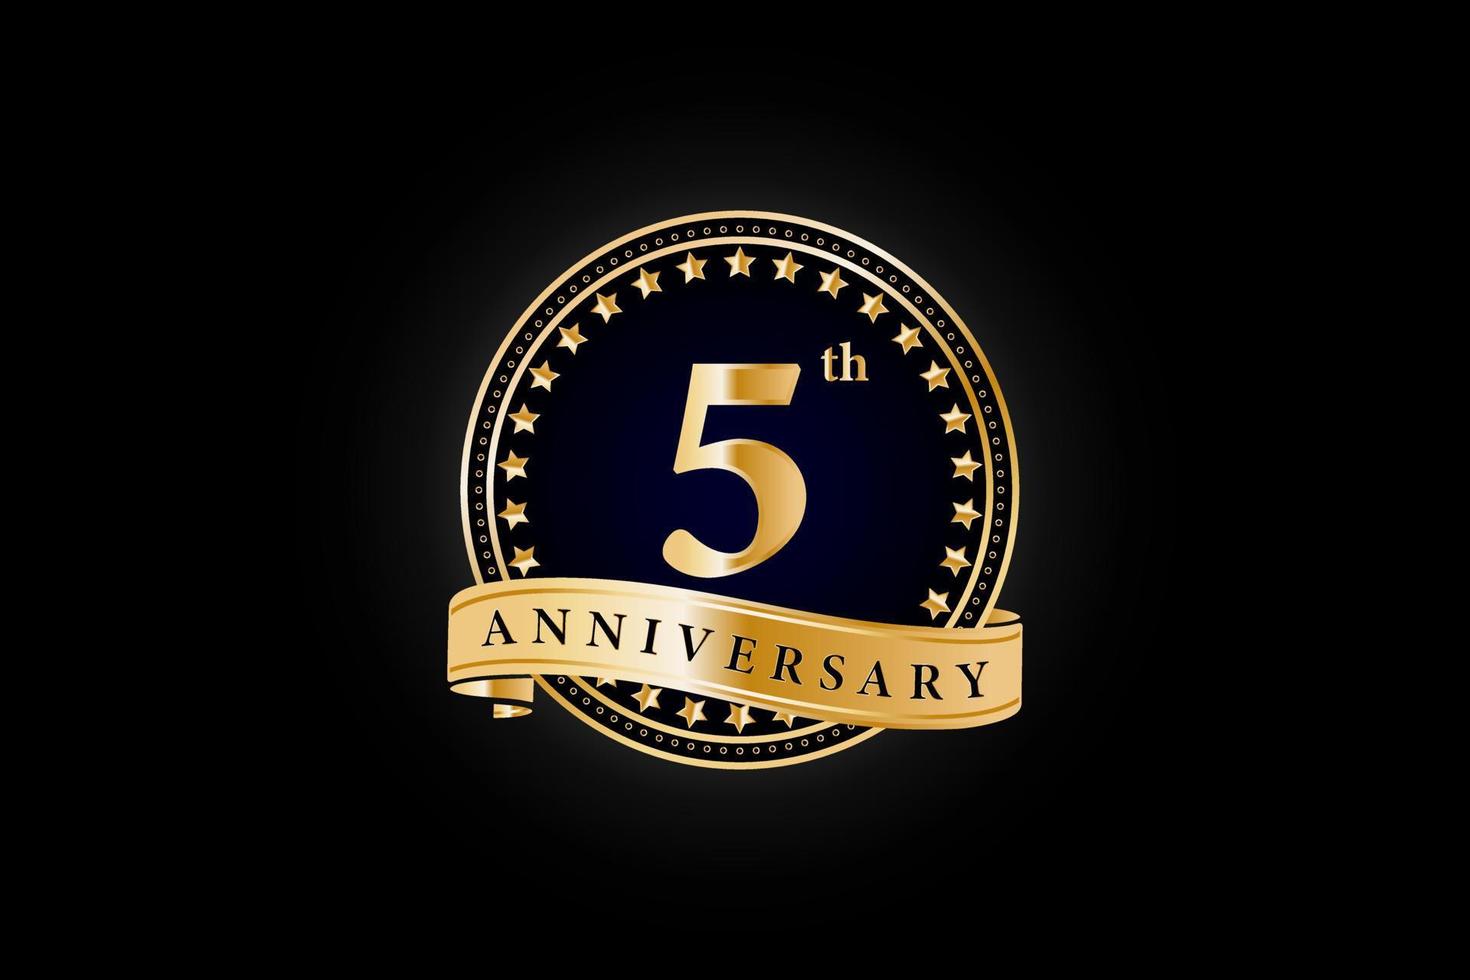 5th anniversary golden gold logo with gold ring and ribbon isolated on black background, vector design for celebration.